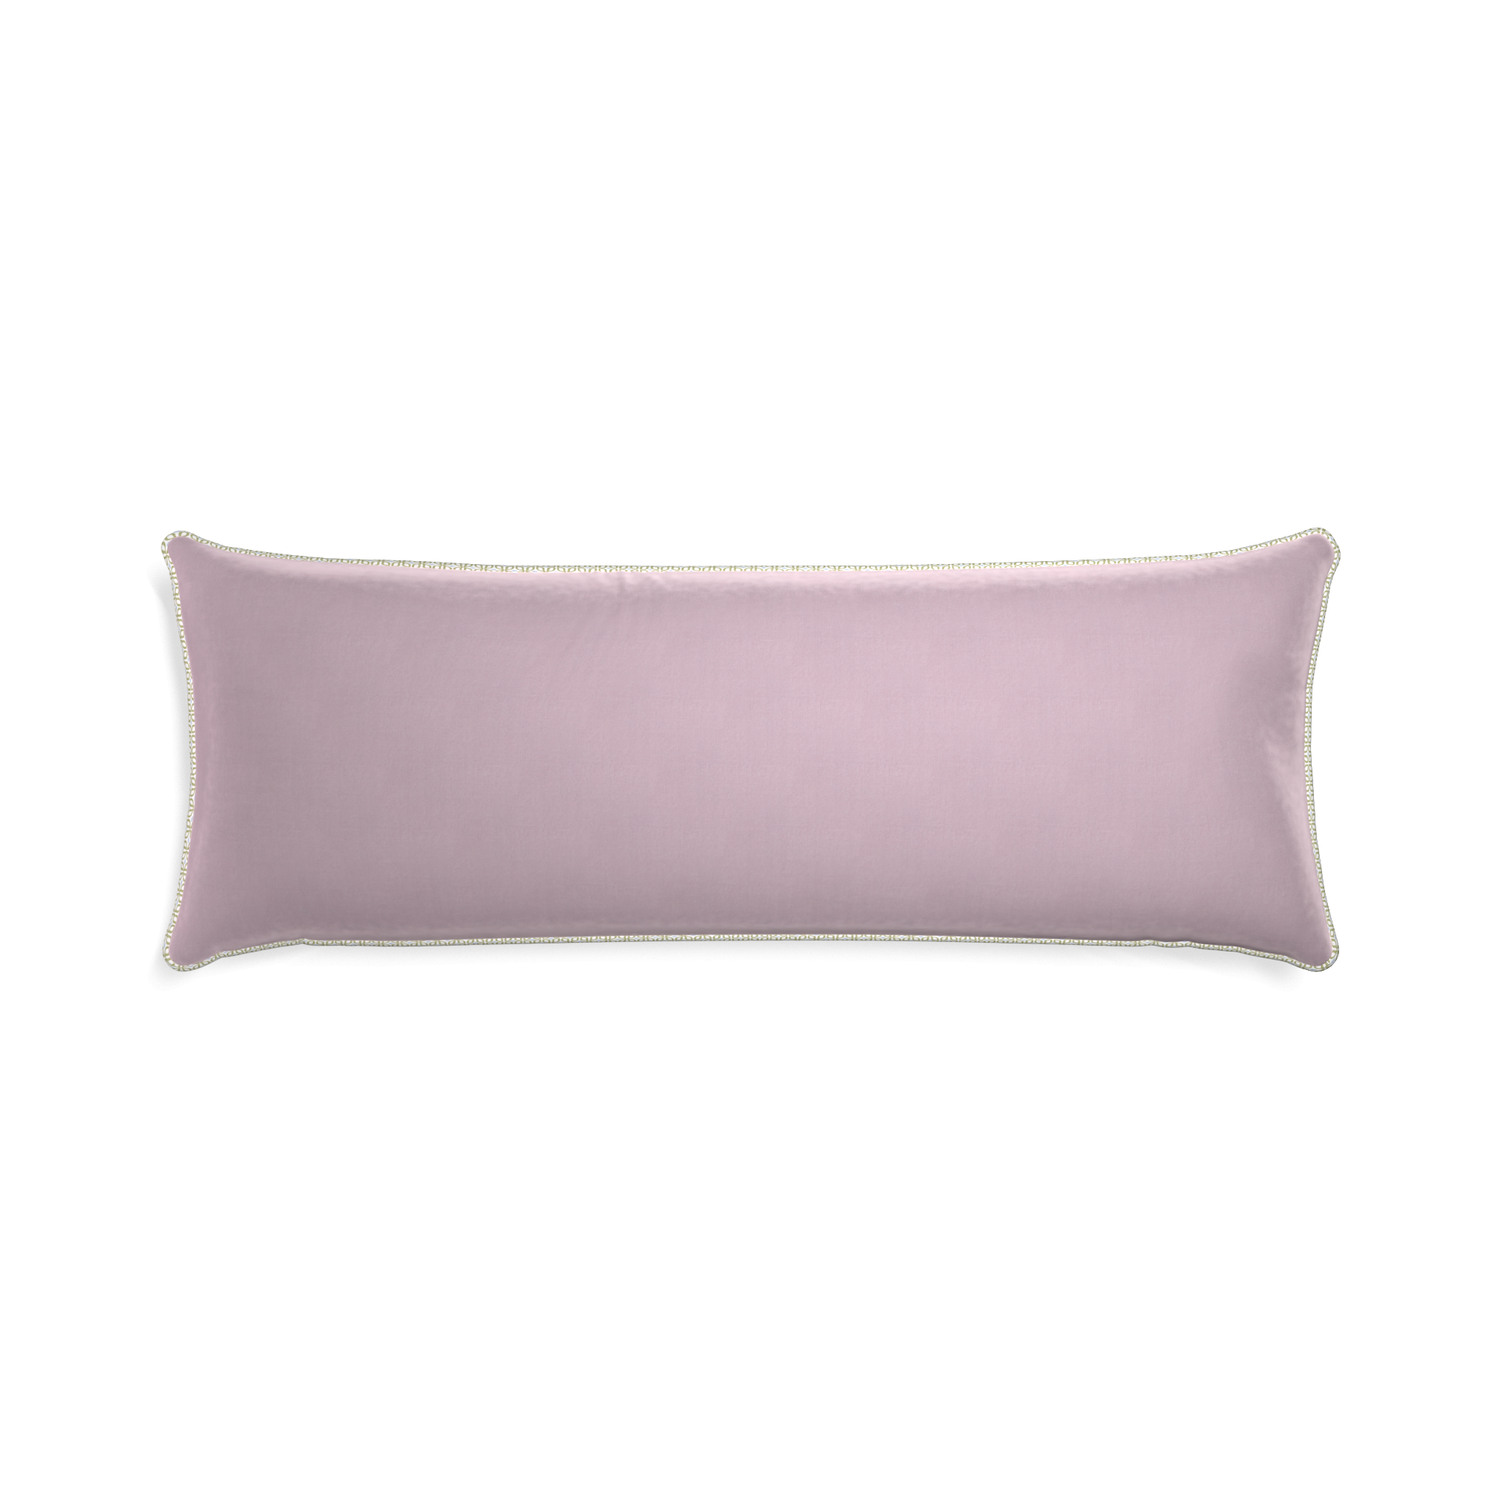 Xl-lumbar lilac velvet custom pillow with l piping on white background